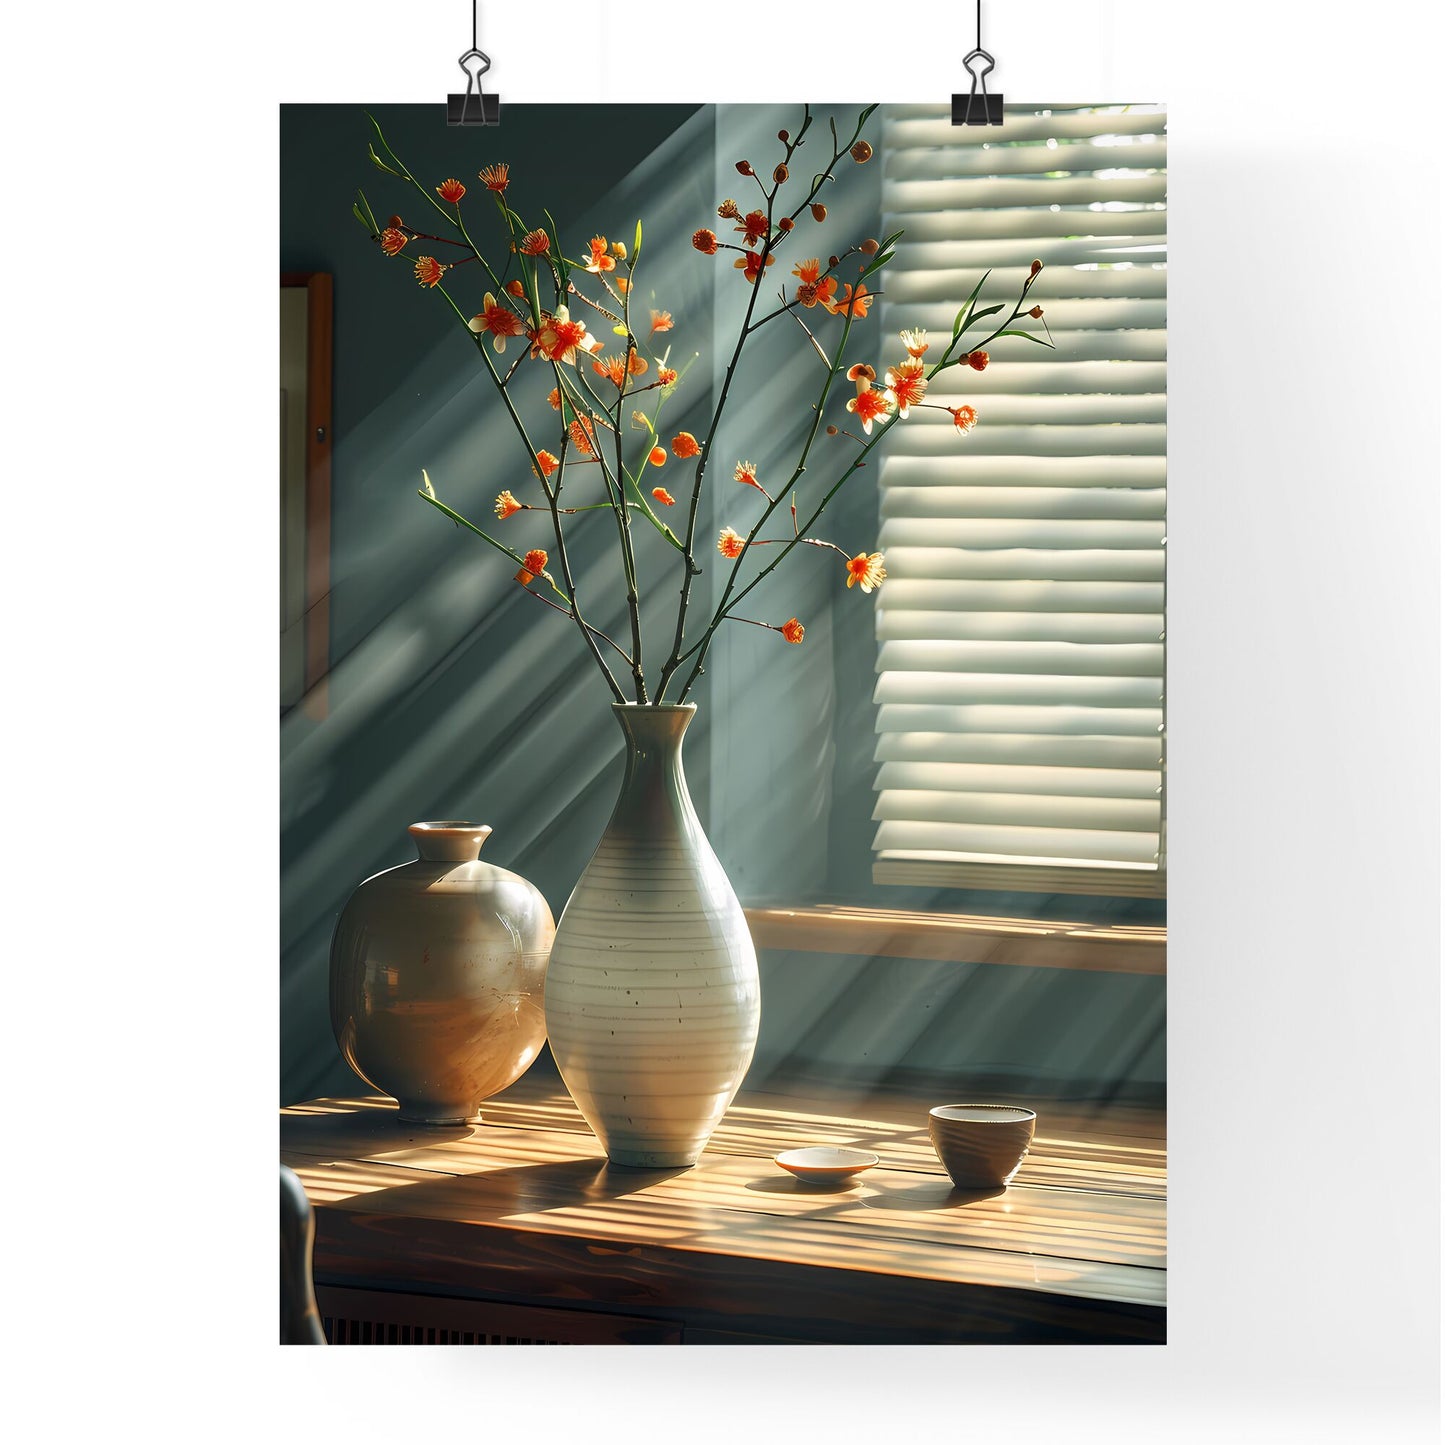 Cubist Still Life Painting: Vibrant Vase with Flowers in Chinese Ink Style Illuminated by Realistic Sun Rays Captured in Light Track Photography Default Title